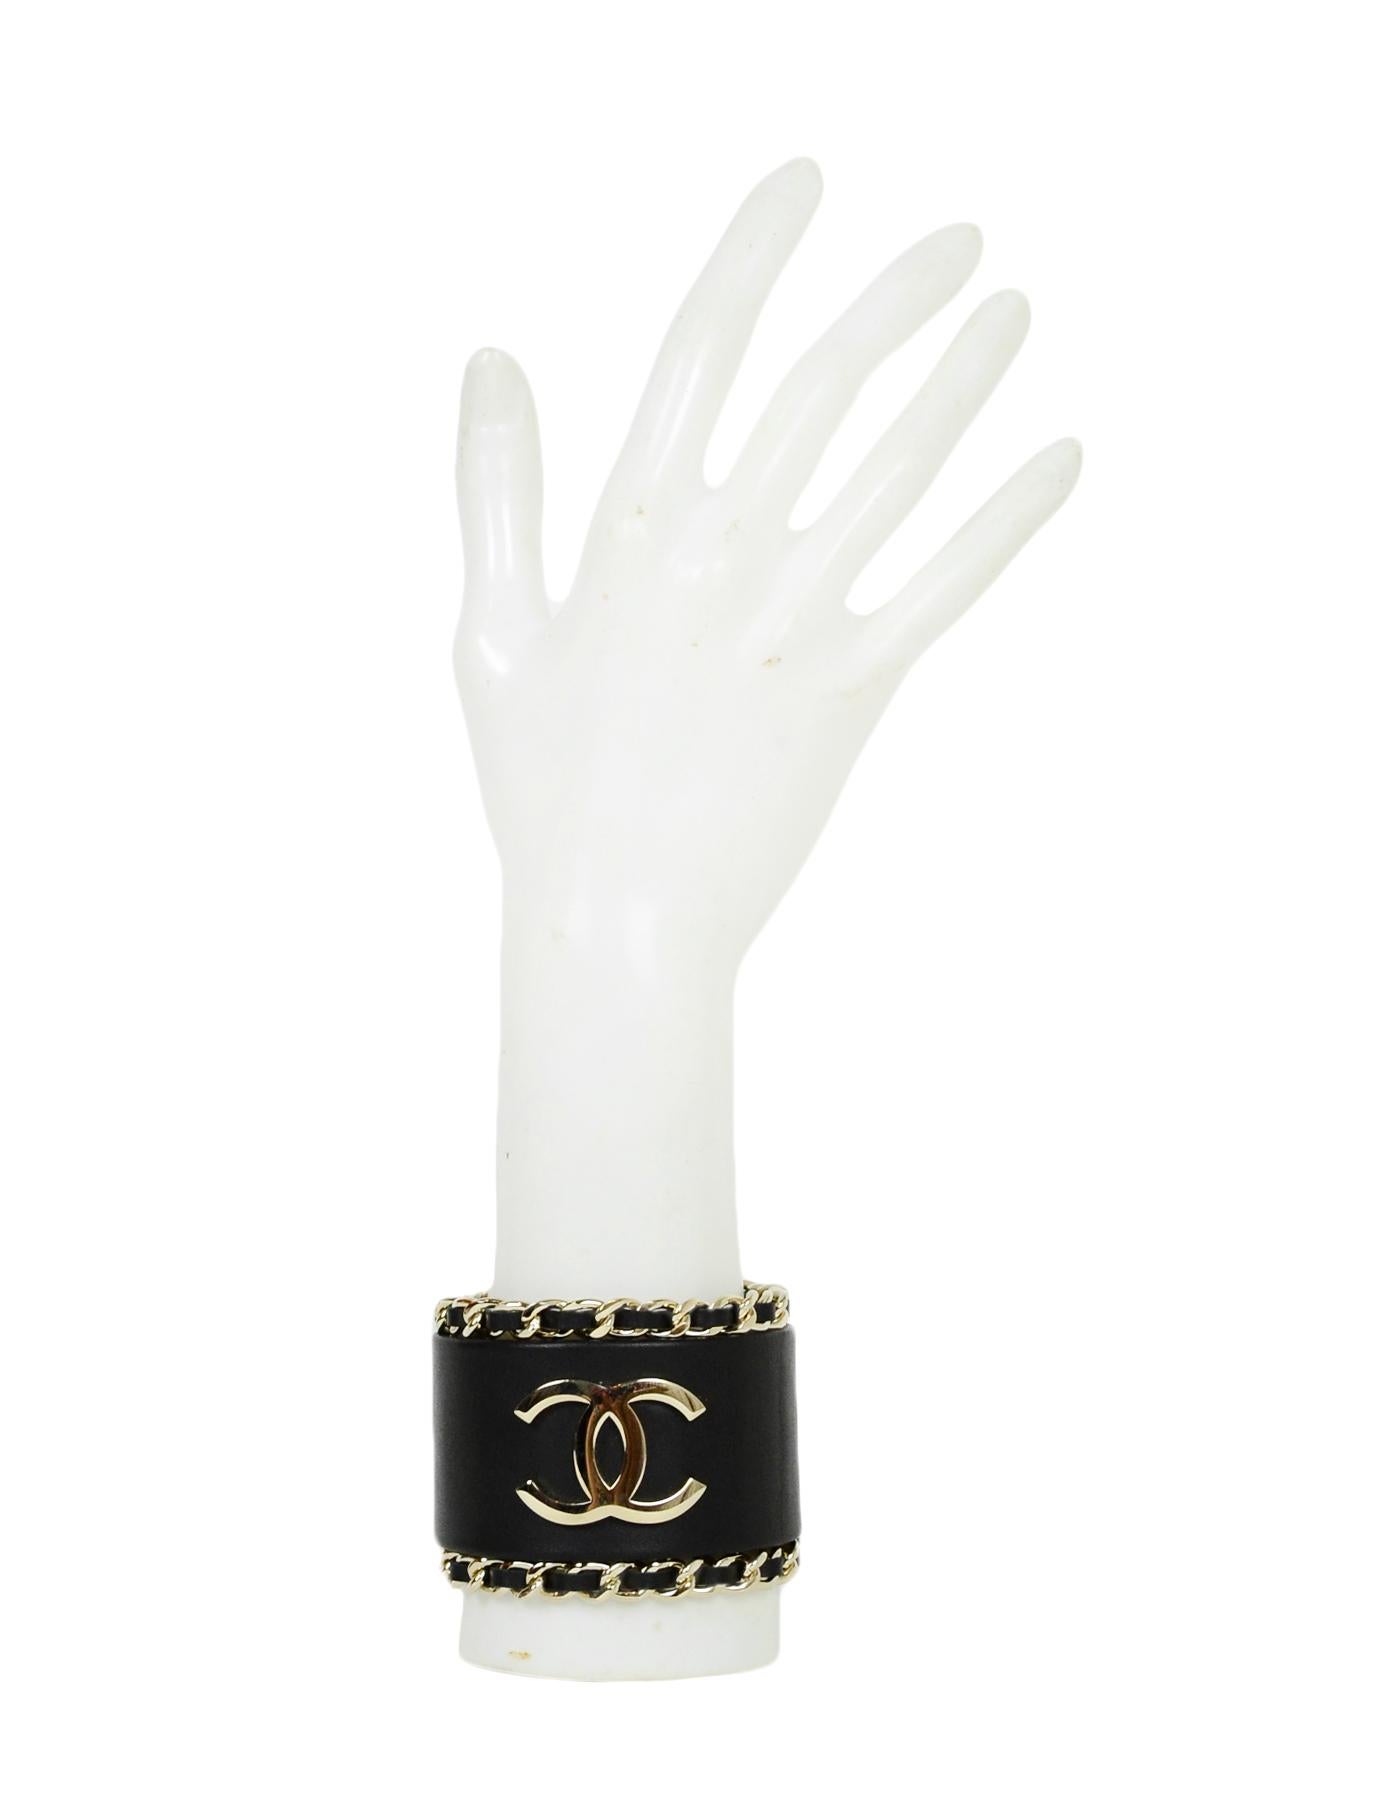 Chanel Black Leather CC Cuff Bracelet w/ Leather Laced Chain Trim
Made In: Italy
Year of Production: 2018
Color: Black, goldtone
Materials: Leather, chain
Hallmarks: B18 CC 8 Made in Italy
Closure/Opening: Bar closure
Overall Condition: Very good